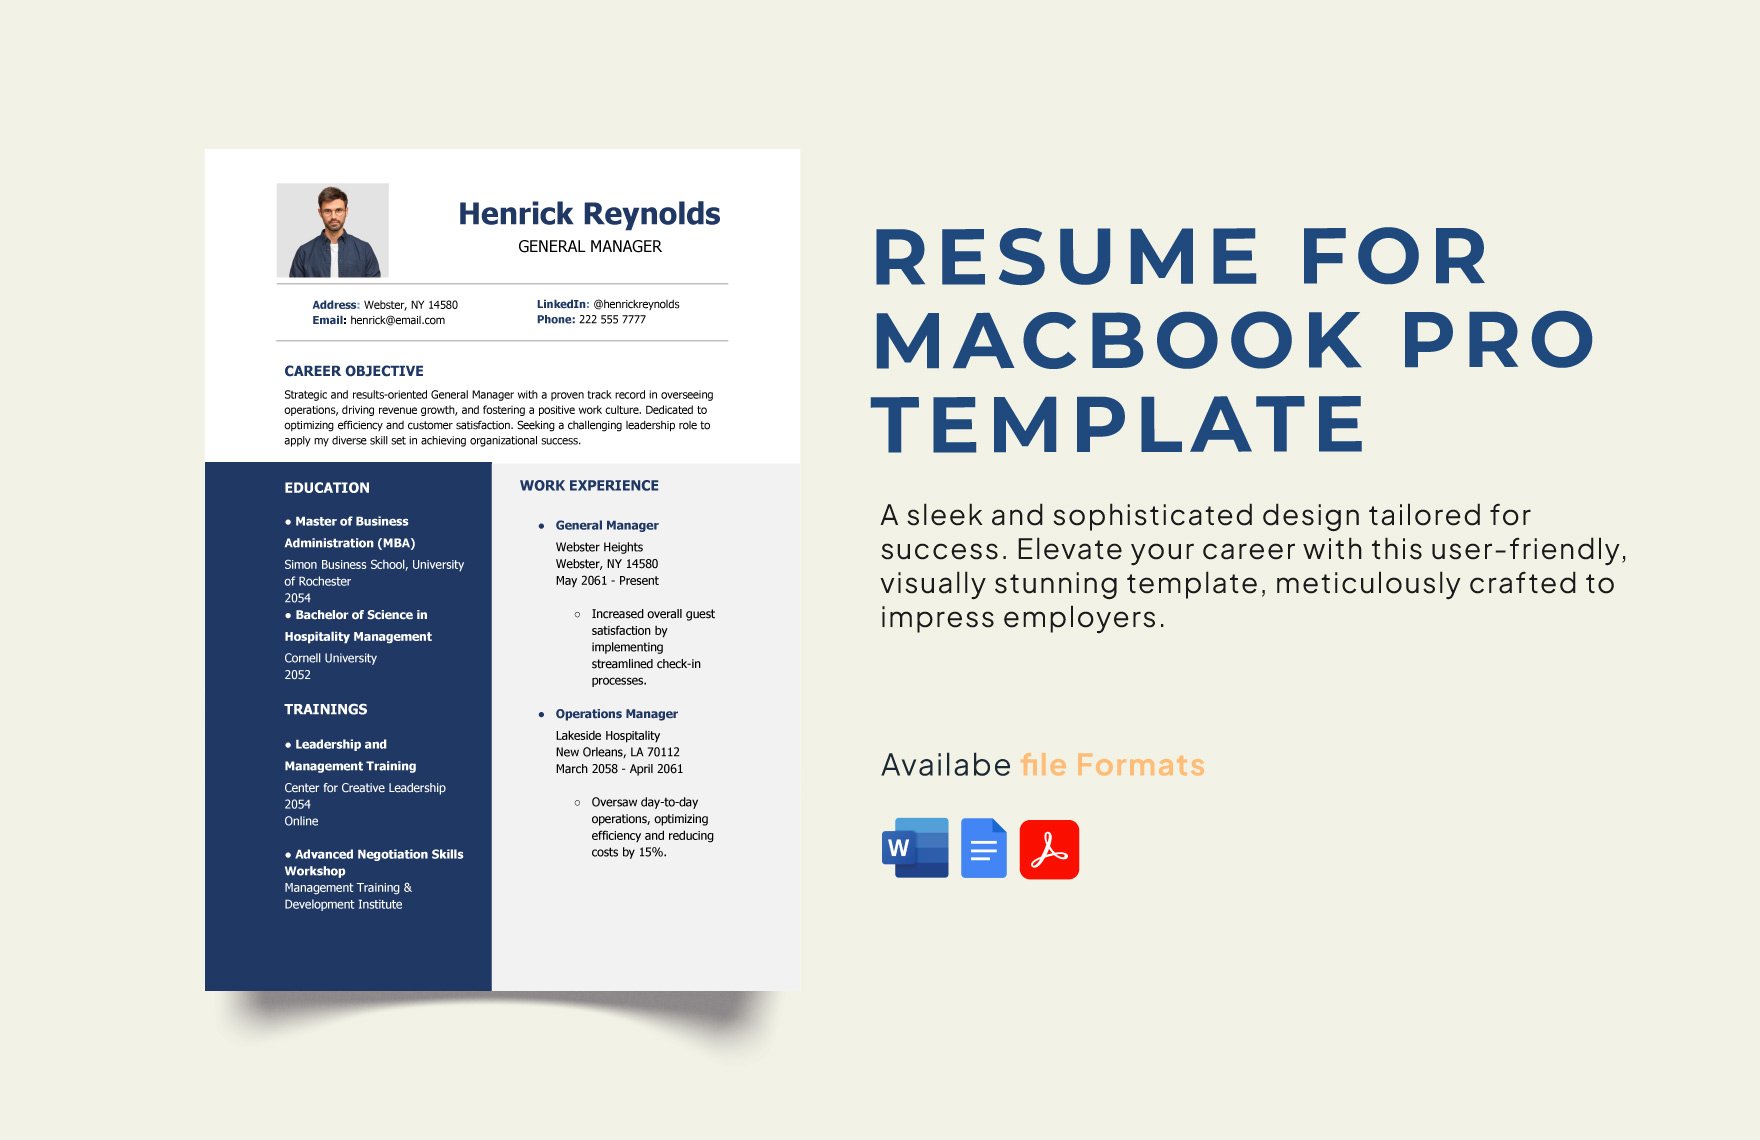 Resume for Macbook Pro Template